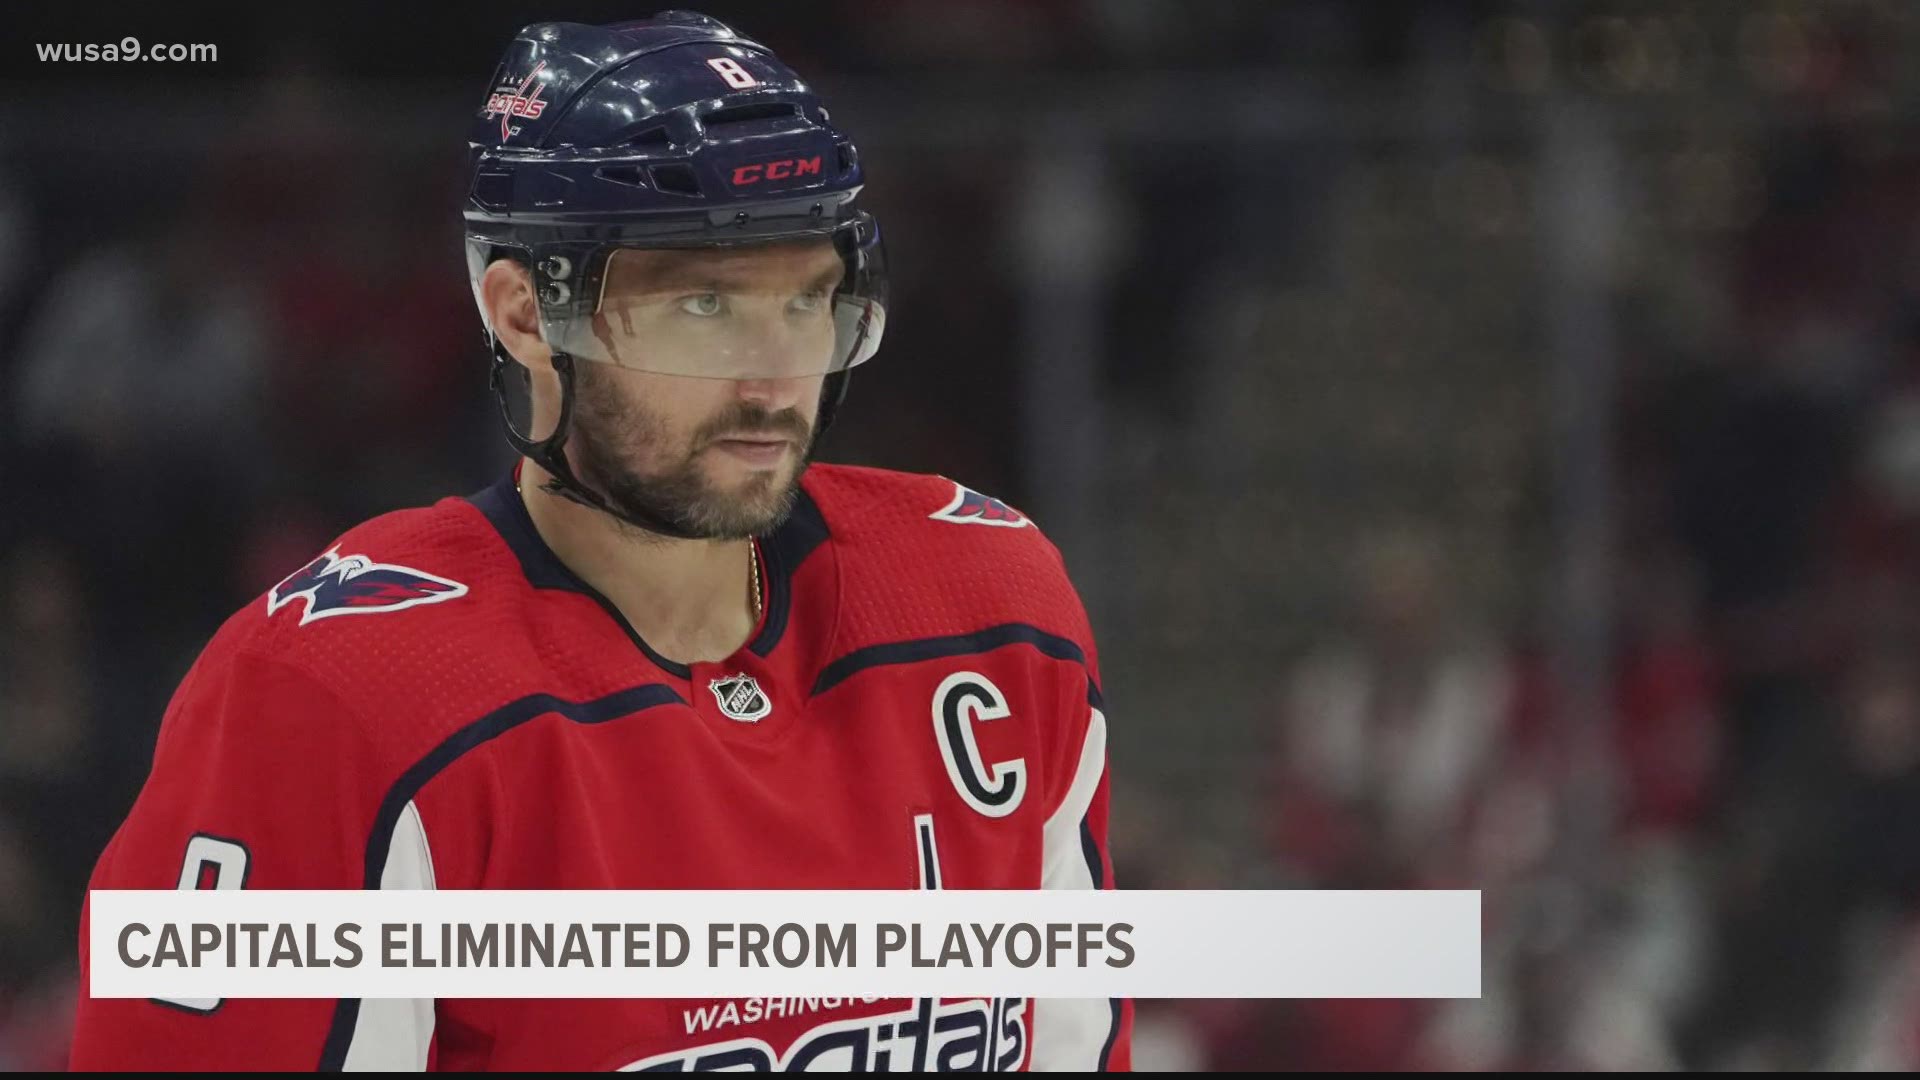 Boston outplays Washington, takes the series in Game 5, as questions arise if Alex Ovechkin will return next season